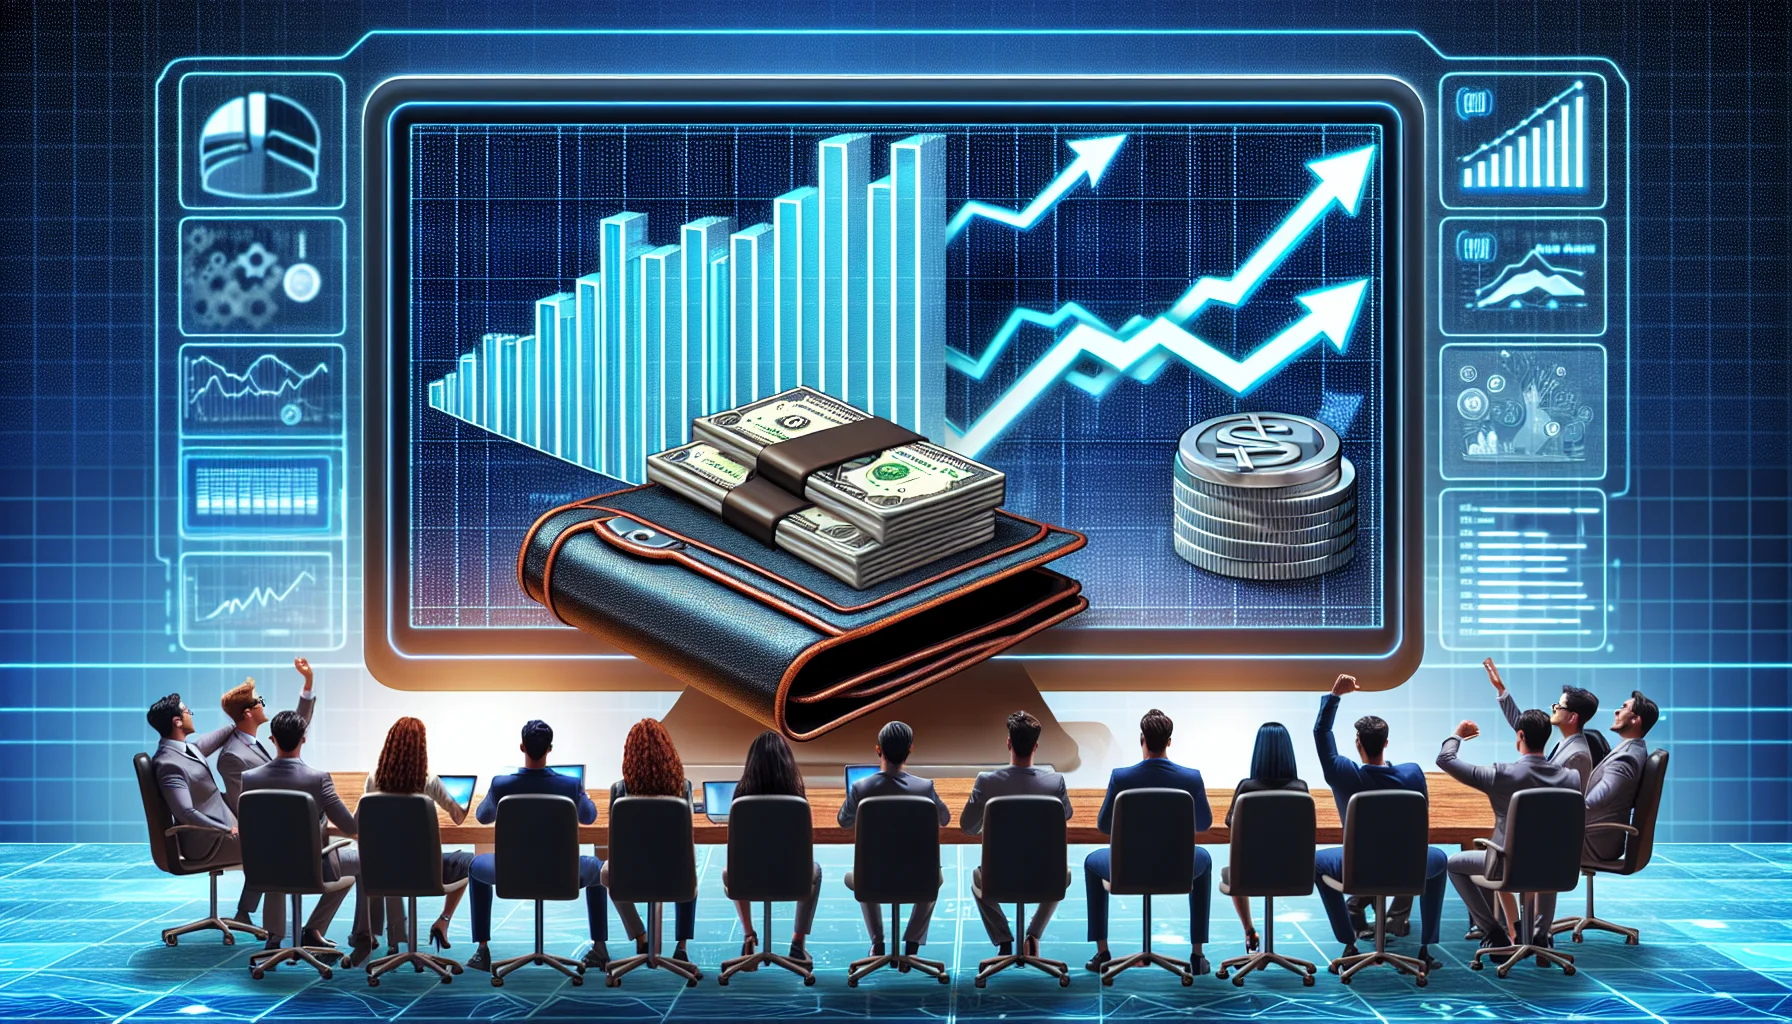 Generate an amusing, realistic image that showcases an exciting scenario related to 'High Ticket Affiliate Marketing'. The scenario unfolds in a high-tech virtual environment, reflecting the theme of making money online. There's a computer screen displaying multiple ascending bar graphs symbolizing profit increases over time and a digital wallet overflowing with virtual coins. Around the computer screen, there are several well-dressed individuals of diverse ethnic descents and genders, looking at the monitor excitedly as they see the possibility of earning a significant income through affiliate marketing.